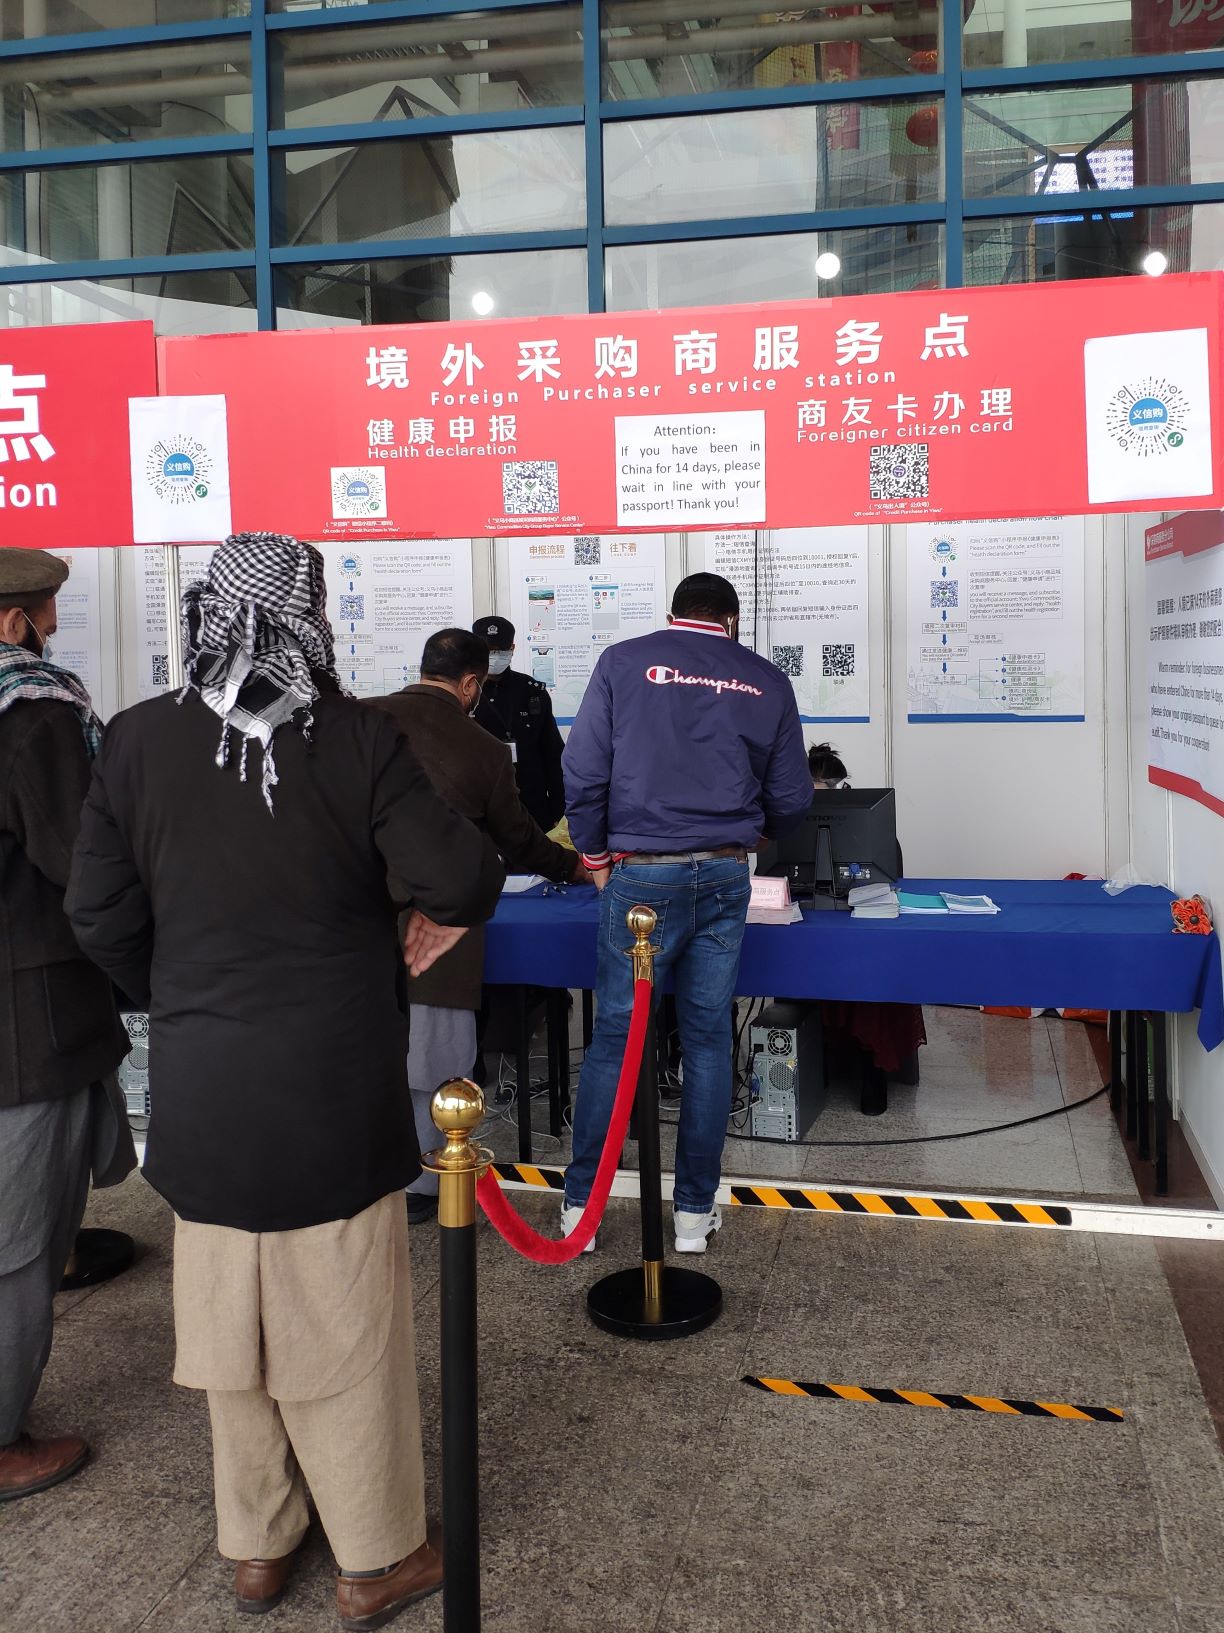 Latest: All overseas buyers need 14 days stay in mainland China before entering entering Yiwu market, because of Coronavirus spread.